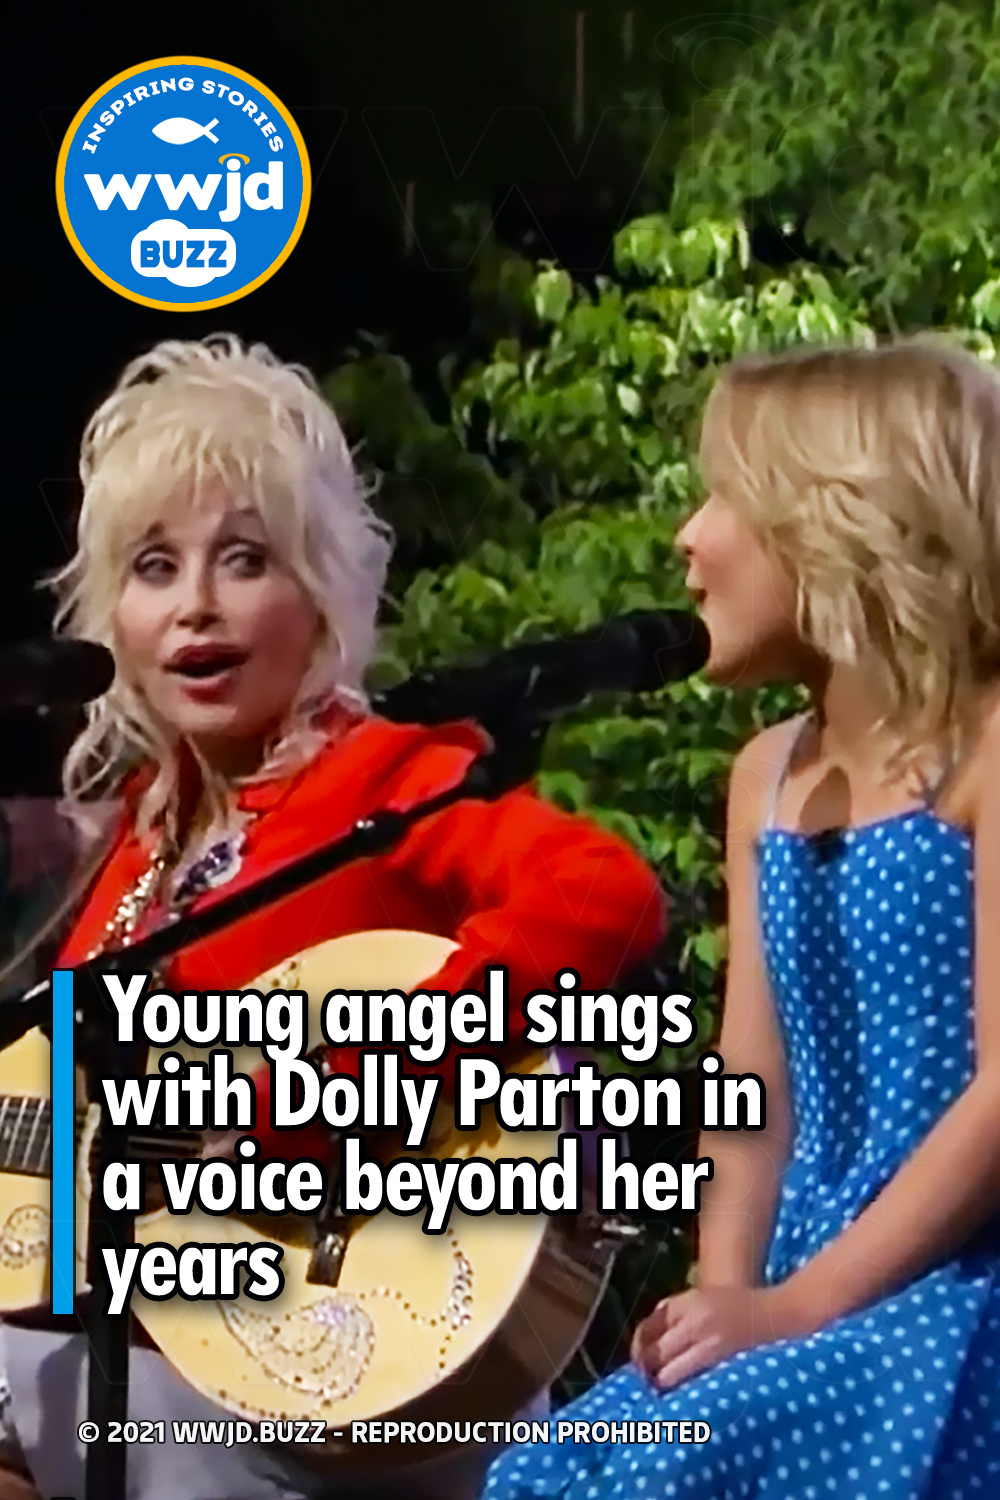 Young angel sings with Dolly Parton in a voice beyond her years